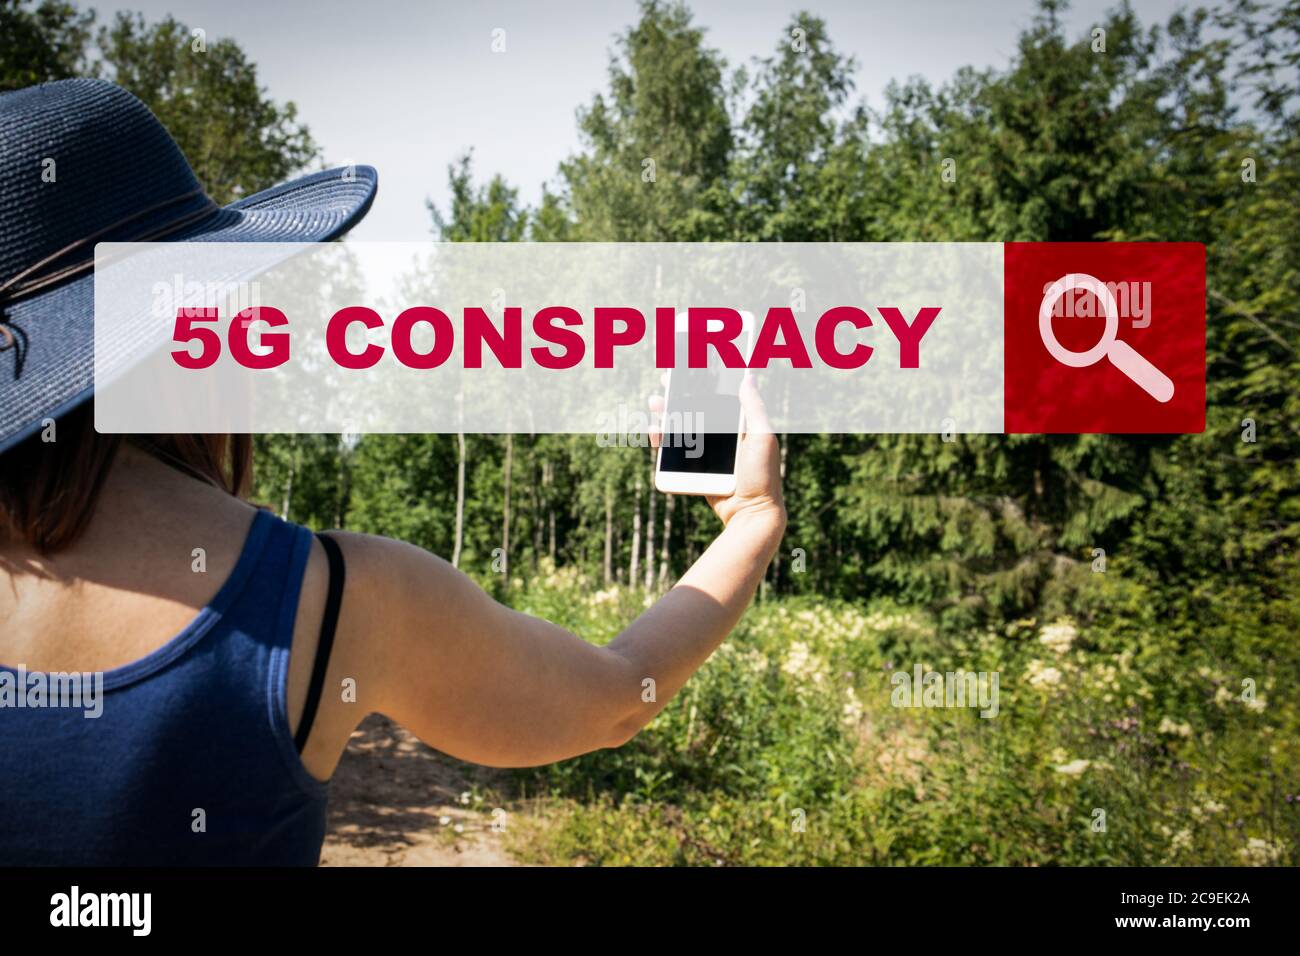 5G CONSPIRACY. Fake news, lies, intimidation and misinformation concept. Internet search engine Stock Photo